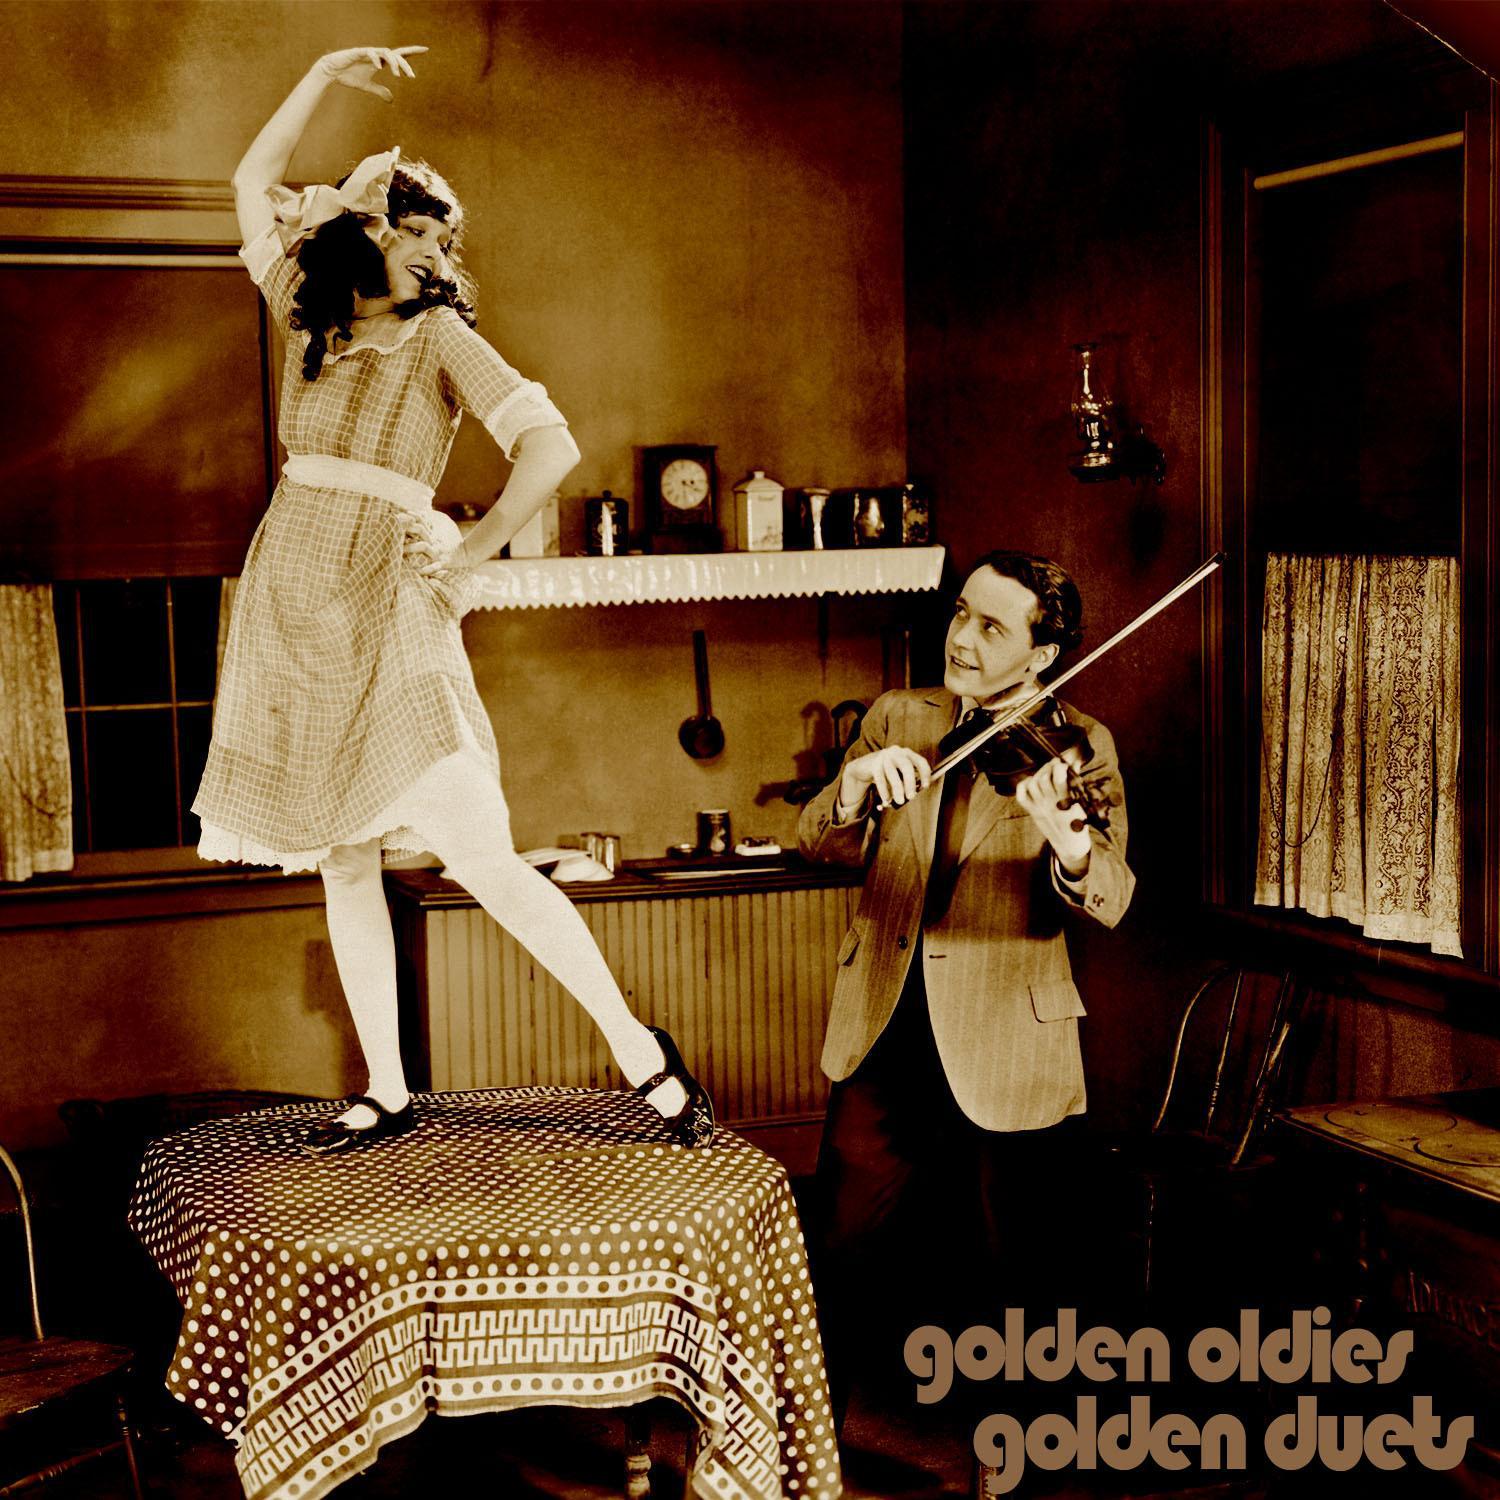 Golden Oldies Golden Duets - Famous and Popular Duets of the 50's and 60's Like Soul Man, Love Is Strange, Let the Good Times Roll, Mocking Bird, Tell Him No, And More!